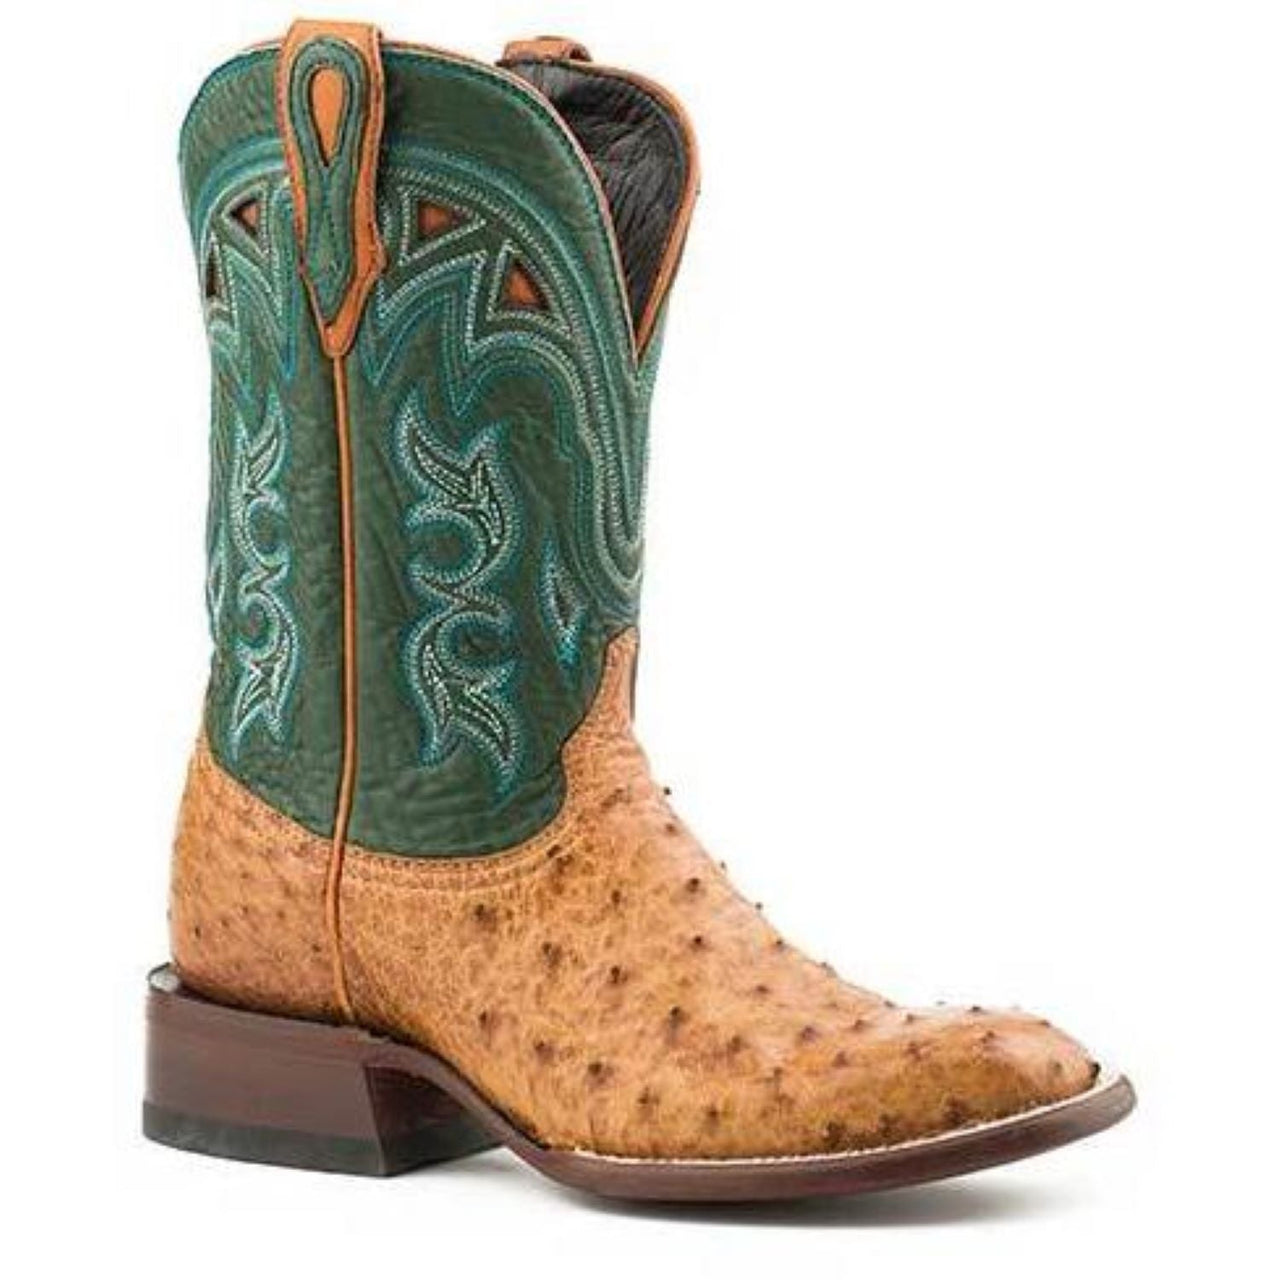 Women's Stetson Libby Ostrich Exotic Boots Handcrafted JBS Collection Tan - yeehawcowboy